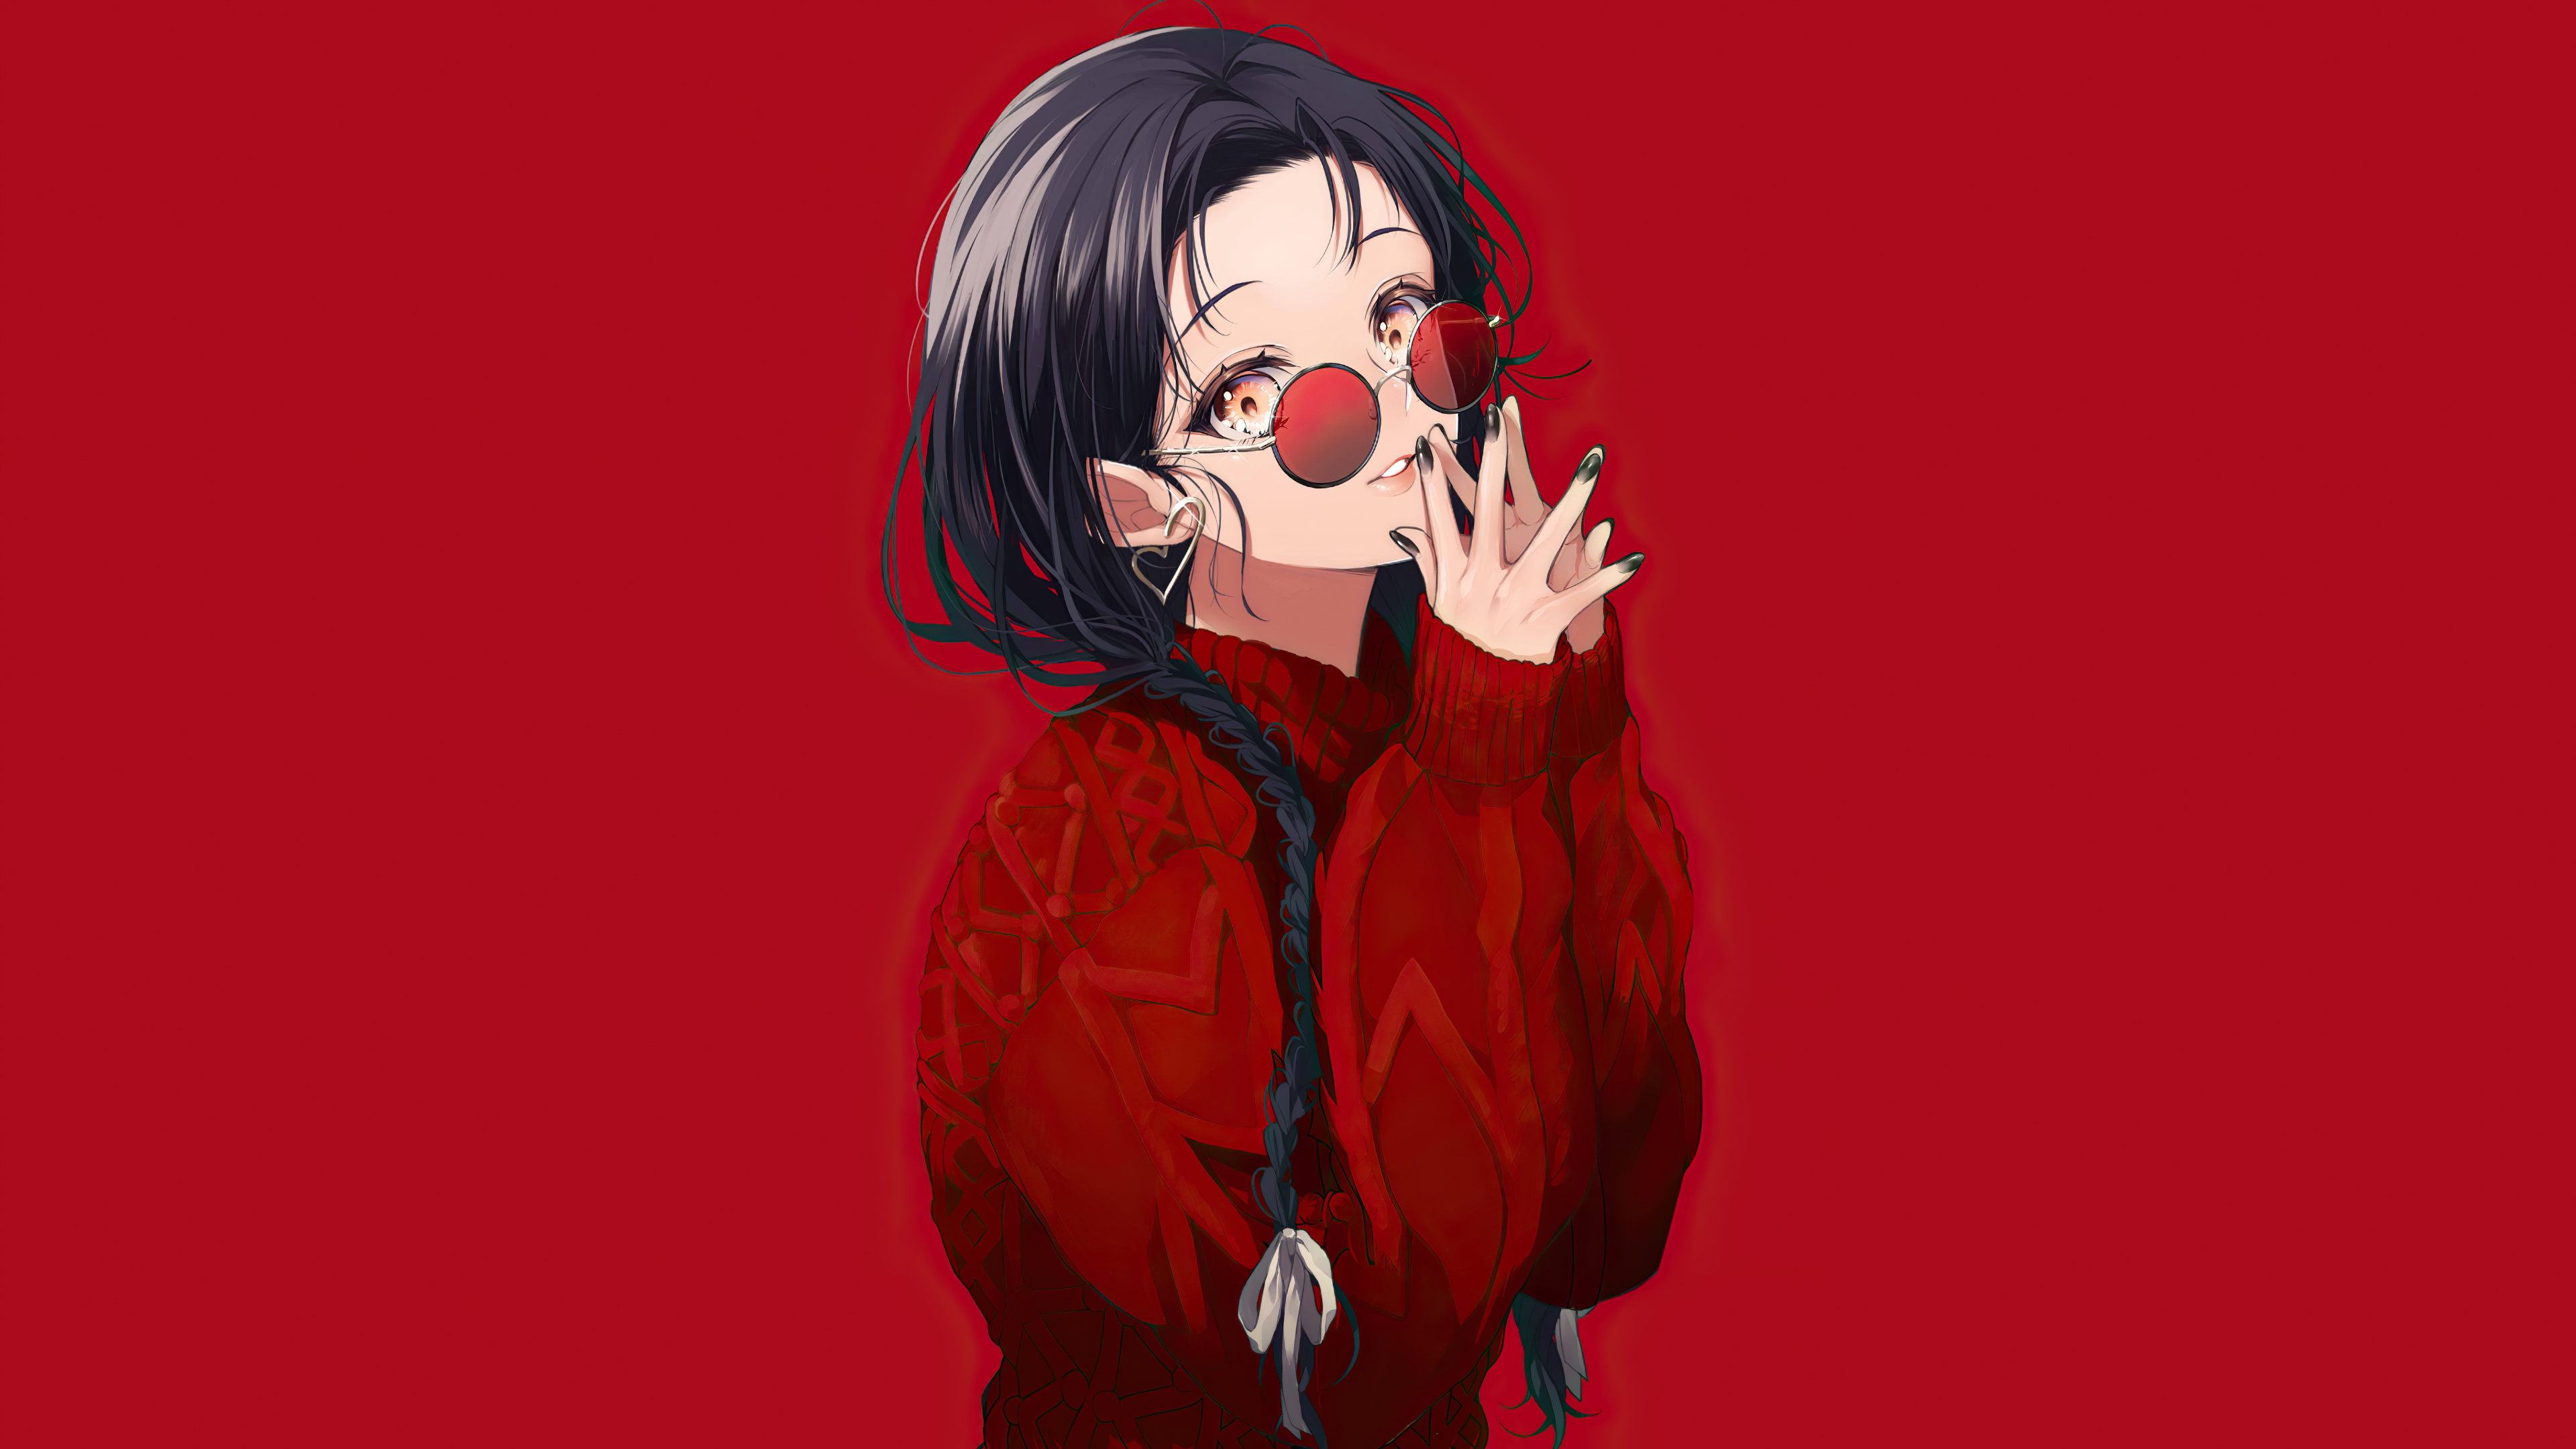 Anime Girl Red Glasses 4k, HD Anime, 4k Wallpapers, Images, Backgrounds